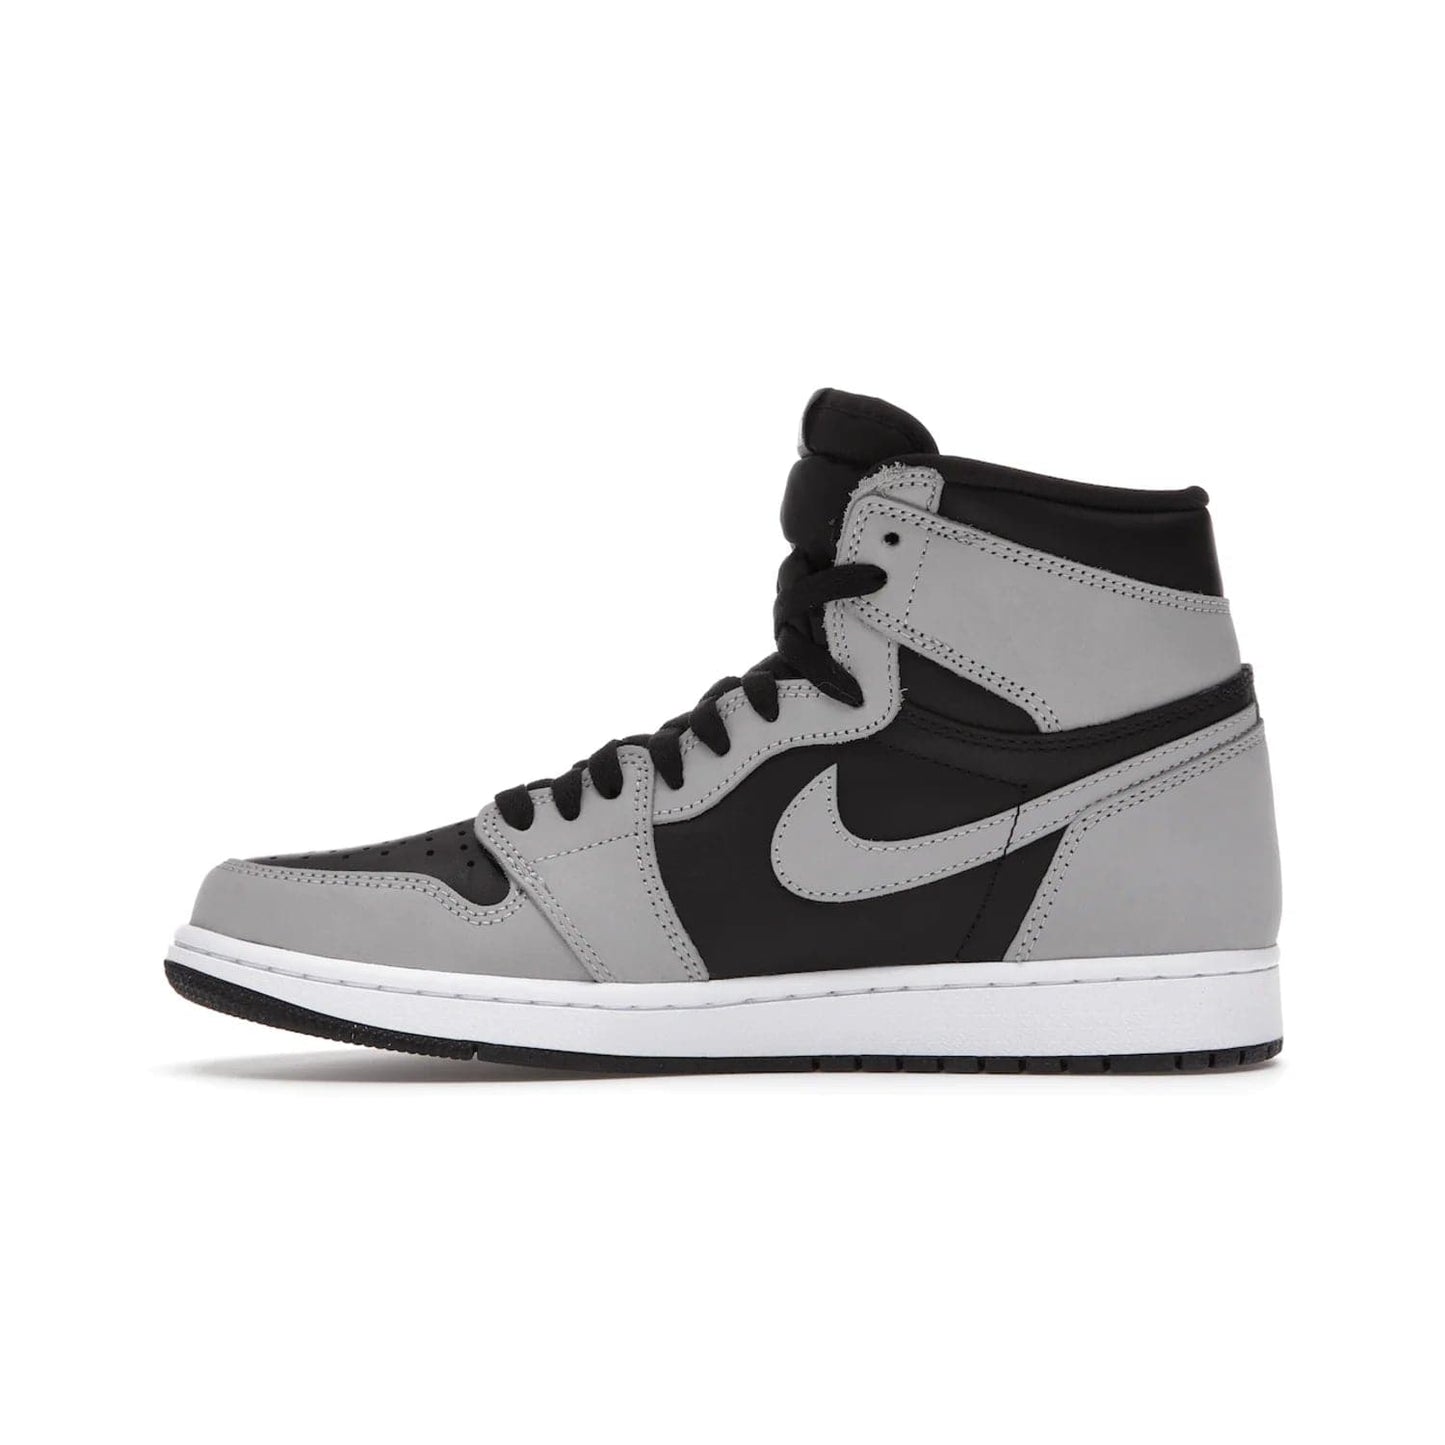 Jordan 1 Retro High Shadow 2.0 - Image 19 - Only at www.BallersClubKickz.com - #
Classic Air Jordan 1 Retro High Shadow 2.0 with black leather base and Light Smoke Grey overlays. Released in May 2021.